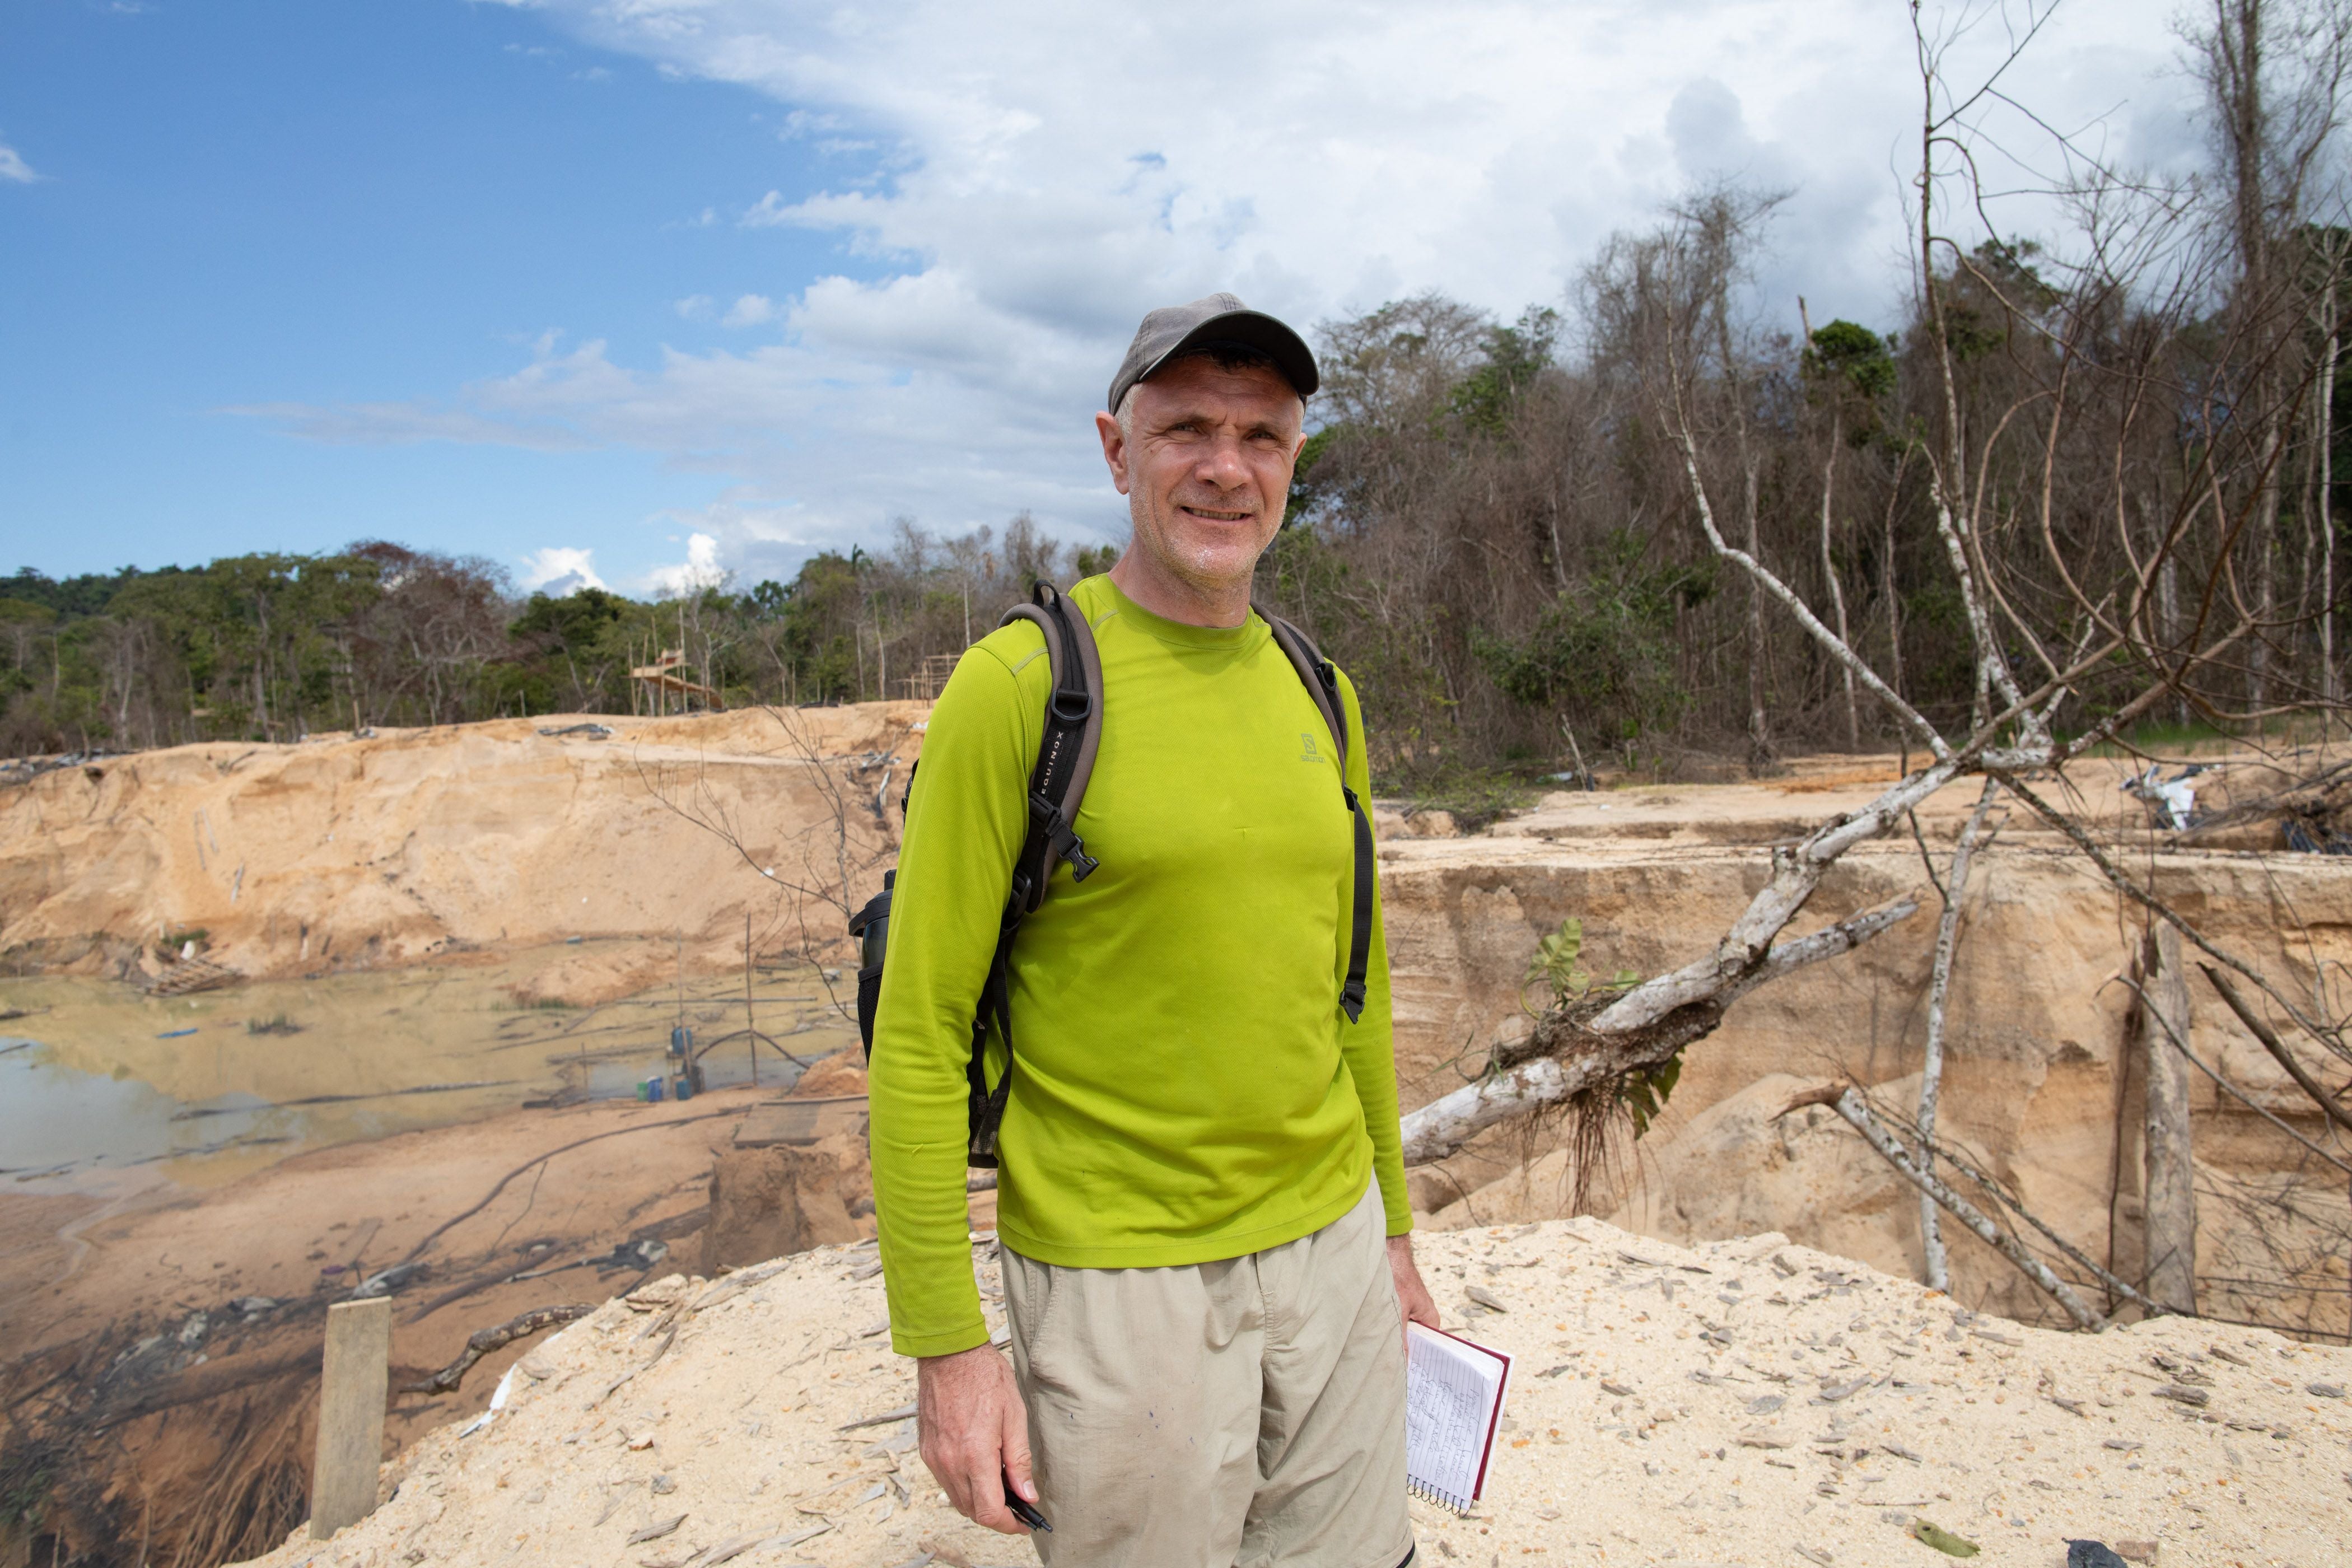 Phillips went missing while researching a book in the Brazilian Amazon's Javari Valley